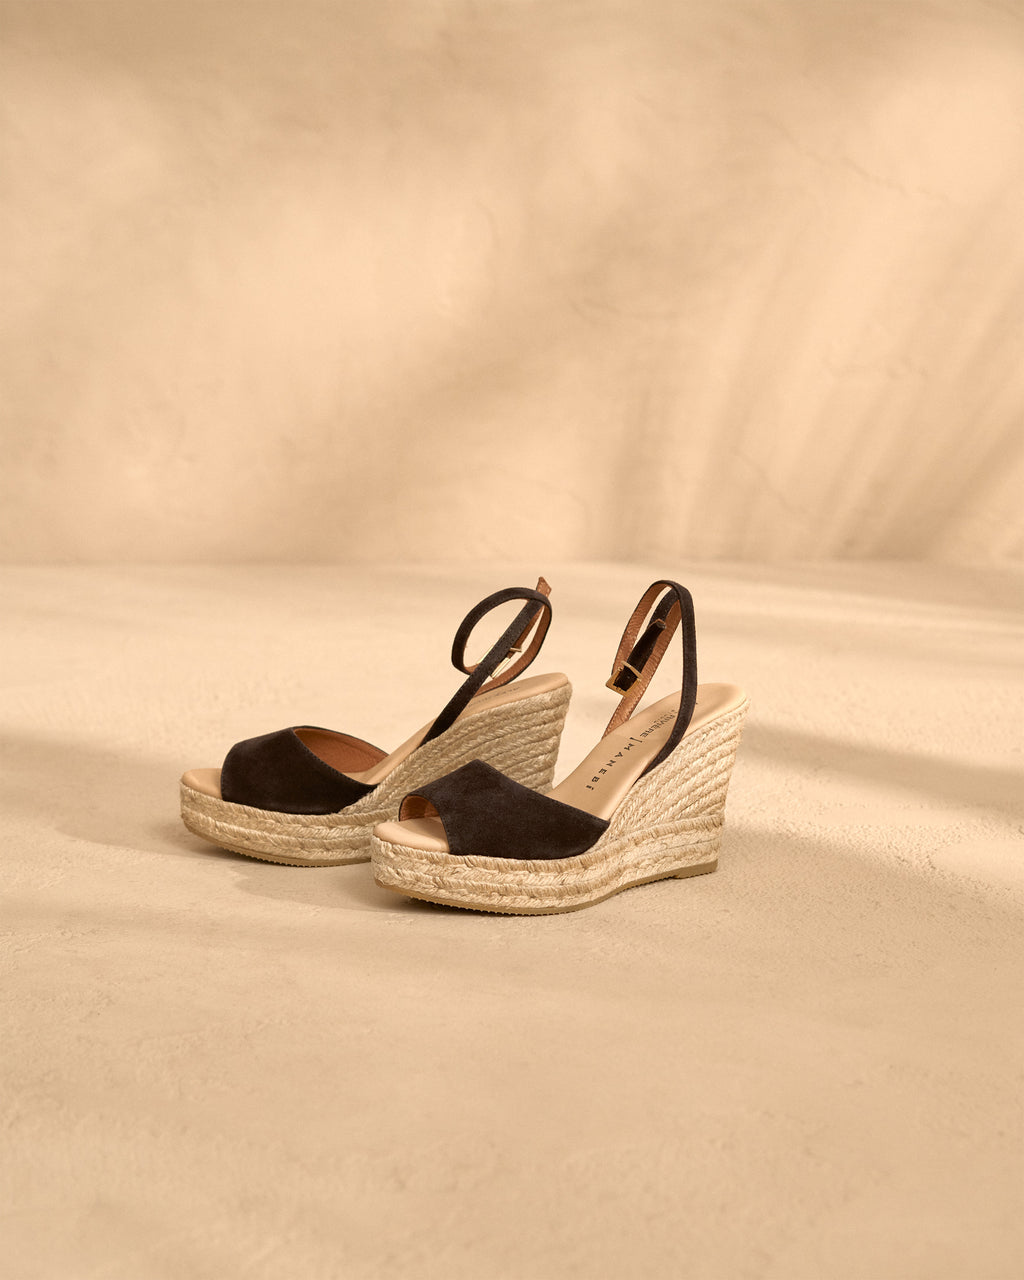 Viky Soft Suede Wedge Espadrilles - Chocolate